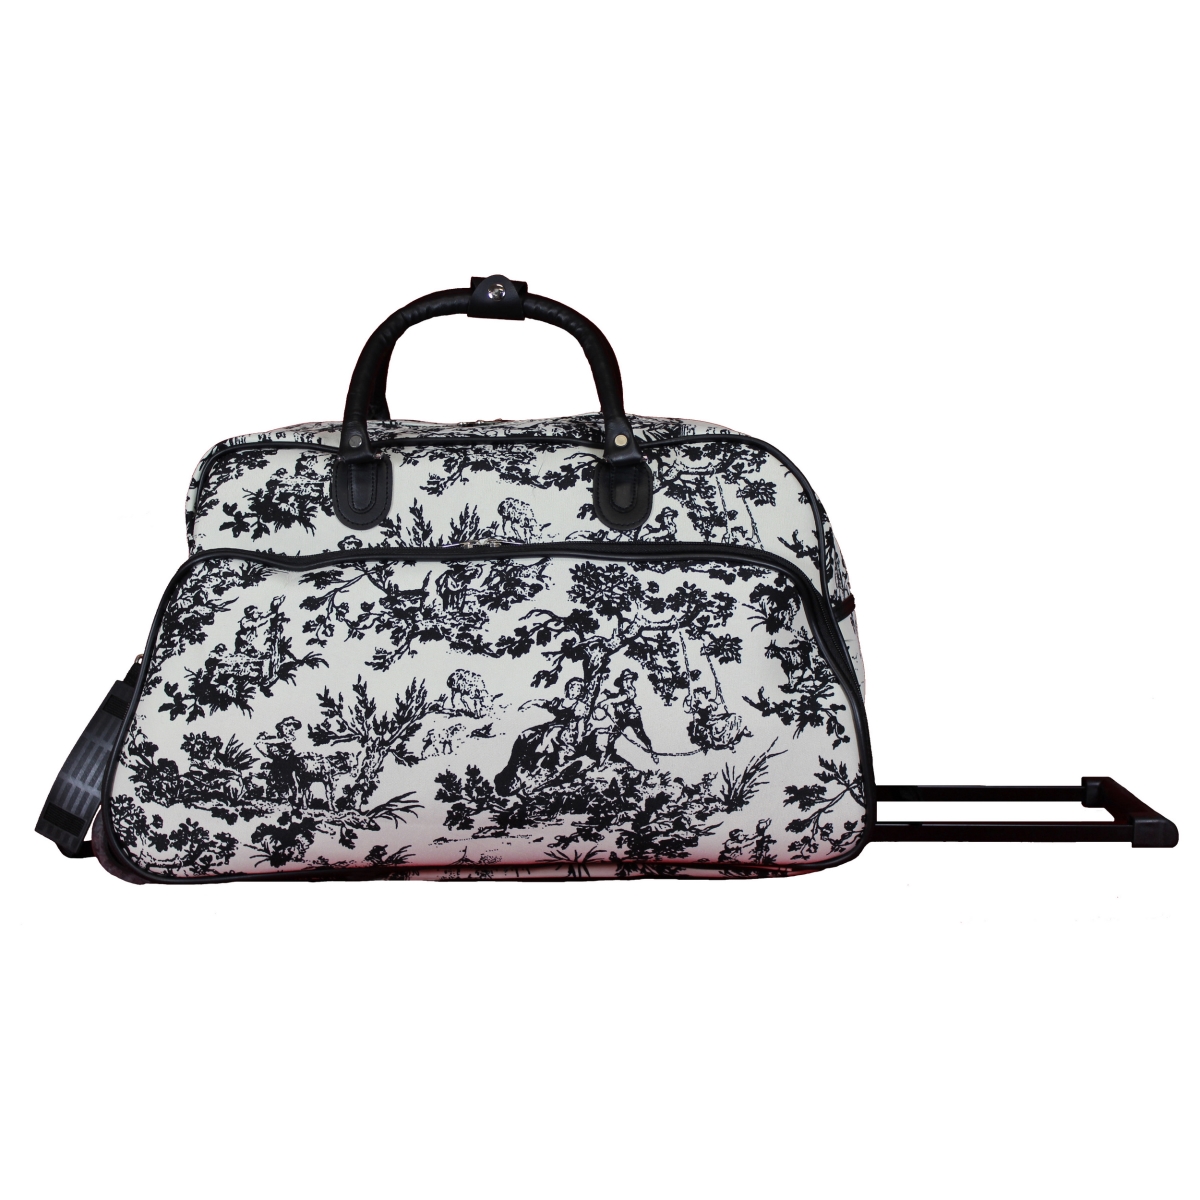 8112022-500-b 21 In. Carry On Rolling Duffel Bag - Countryside White